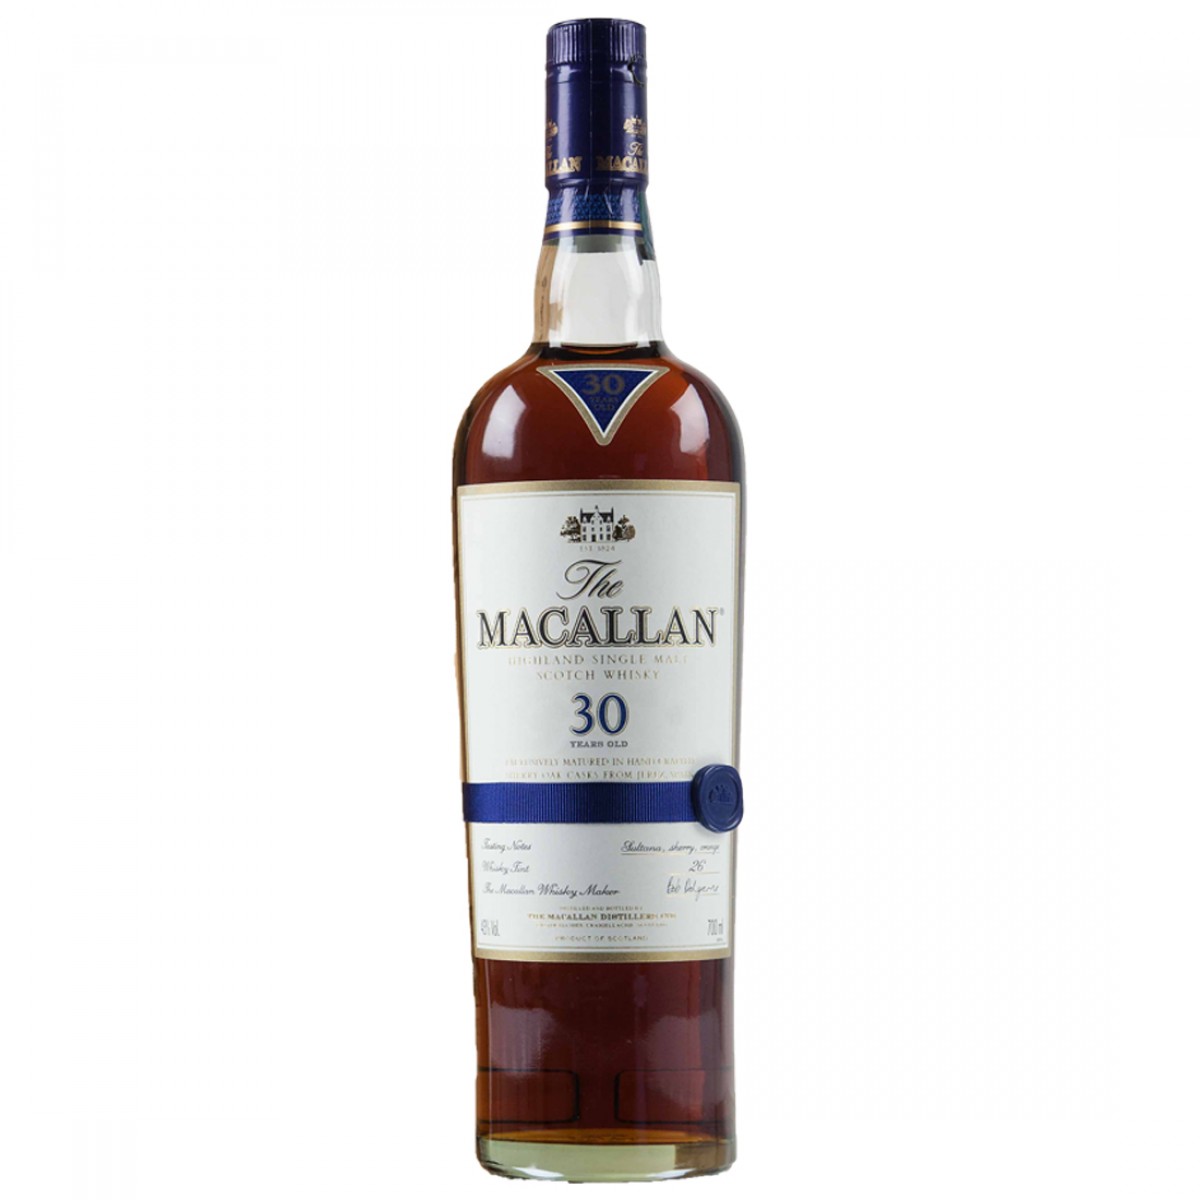 The Macallan 30yrs 2016 release